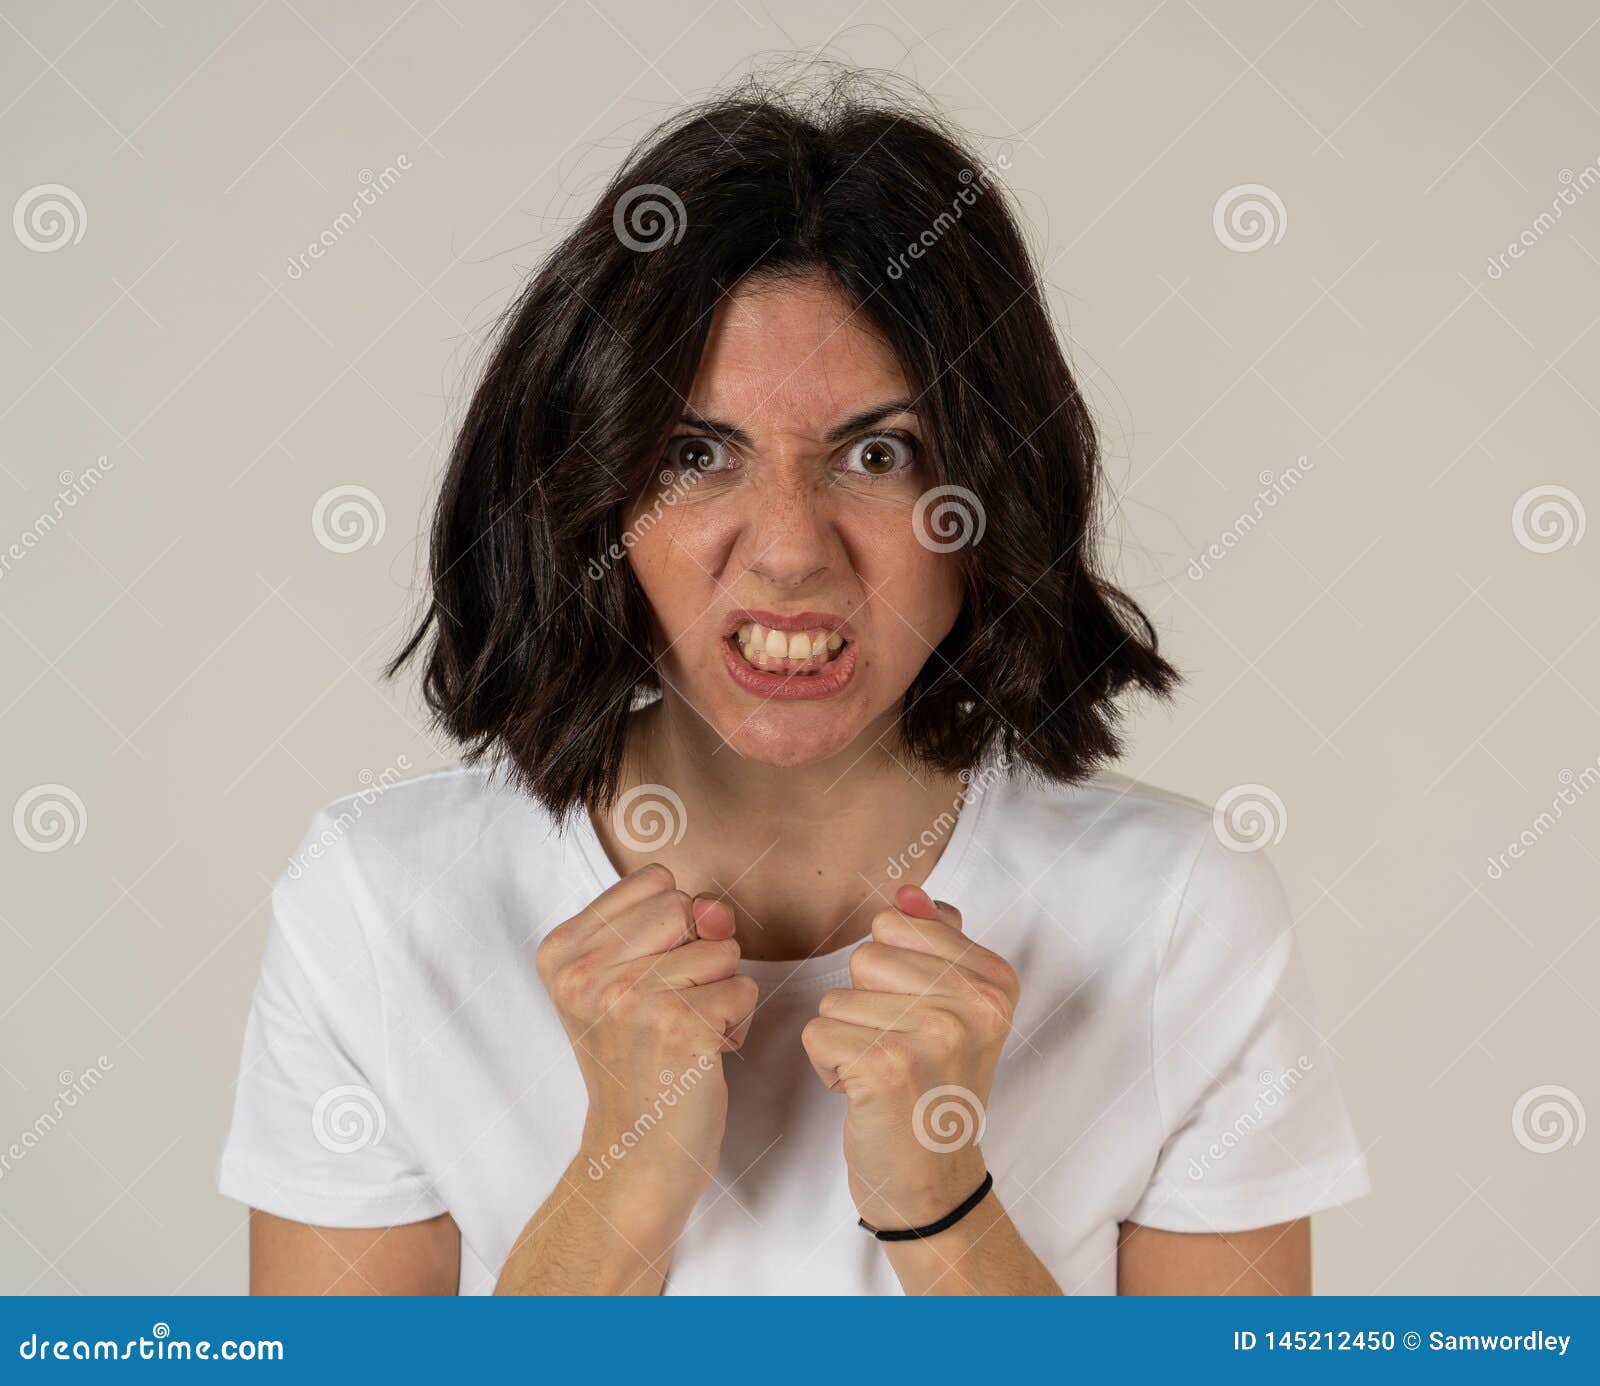 Portrait Of A Beautiful Young Woman With Angry Face Looking Furious 